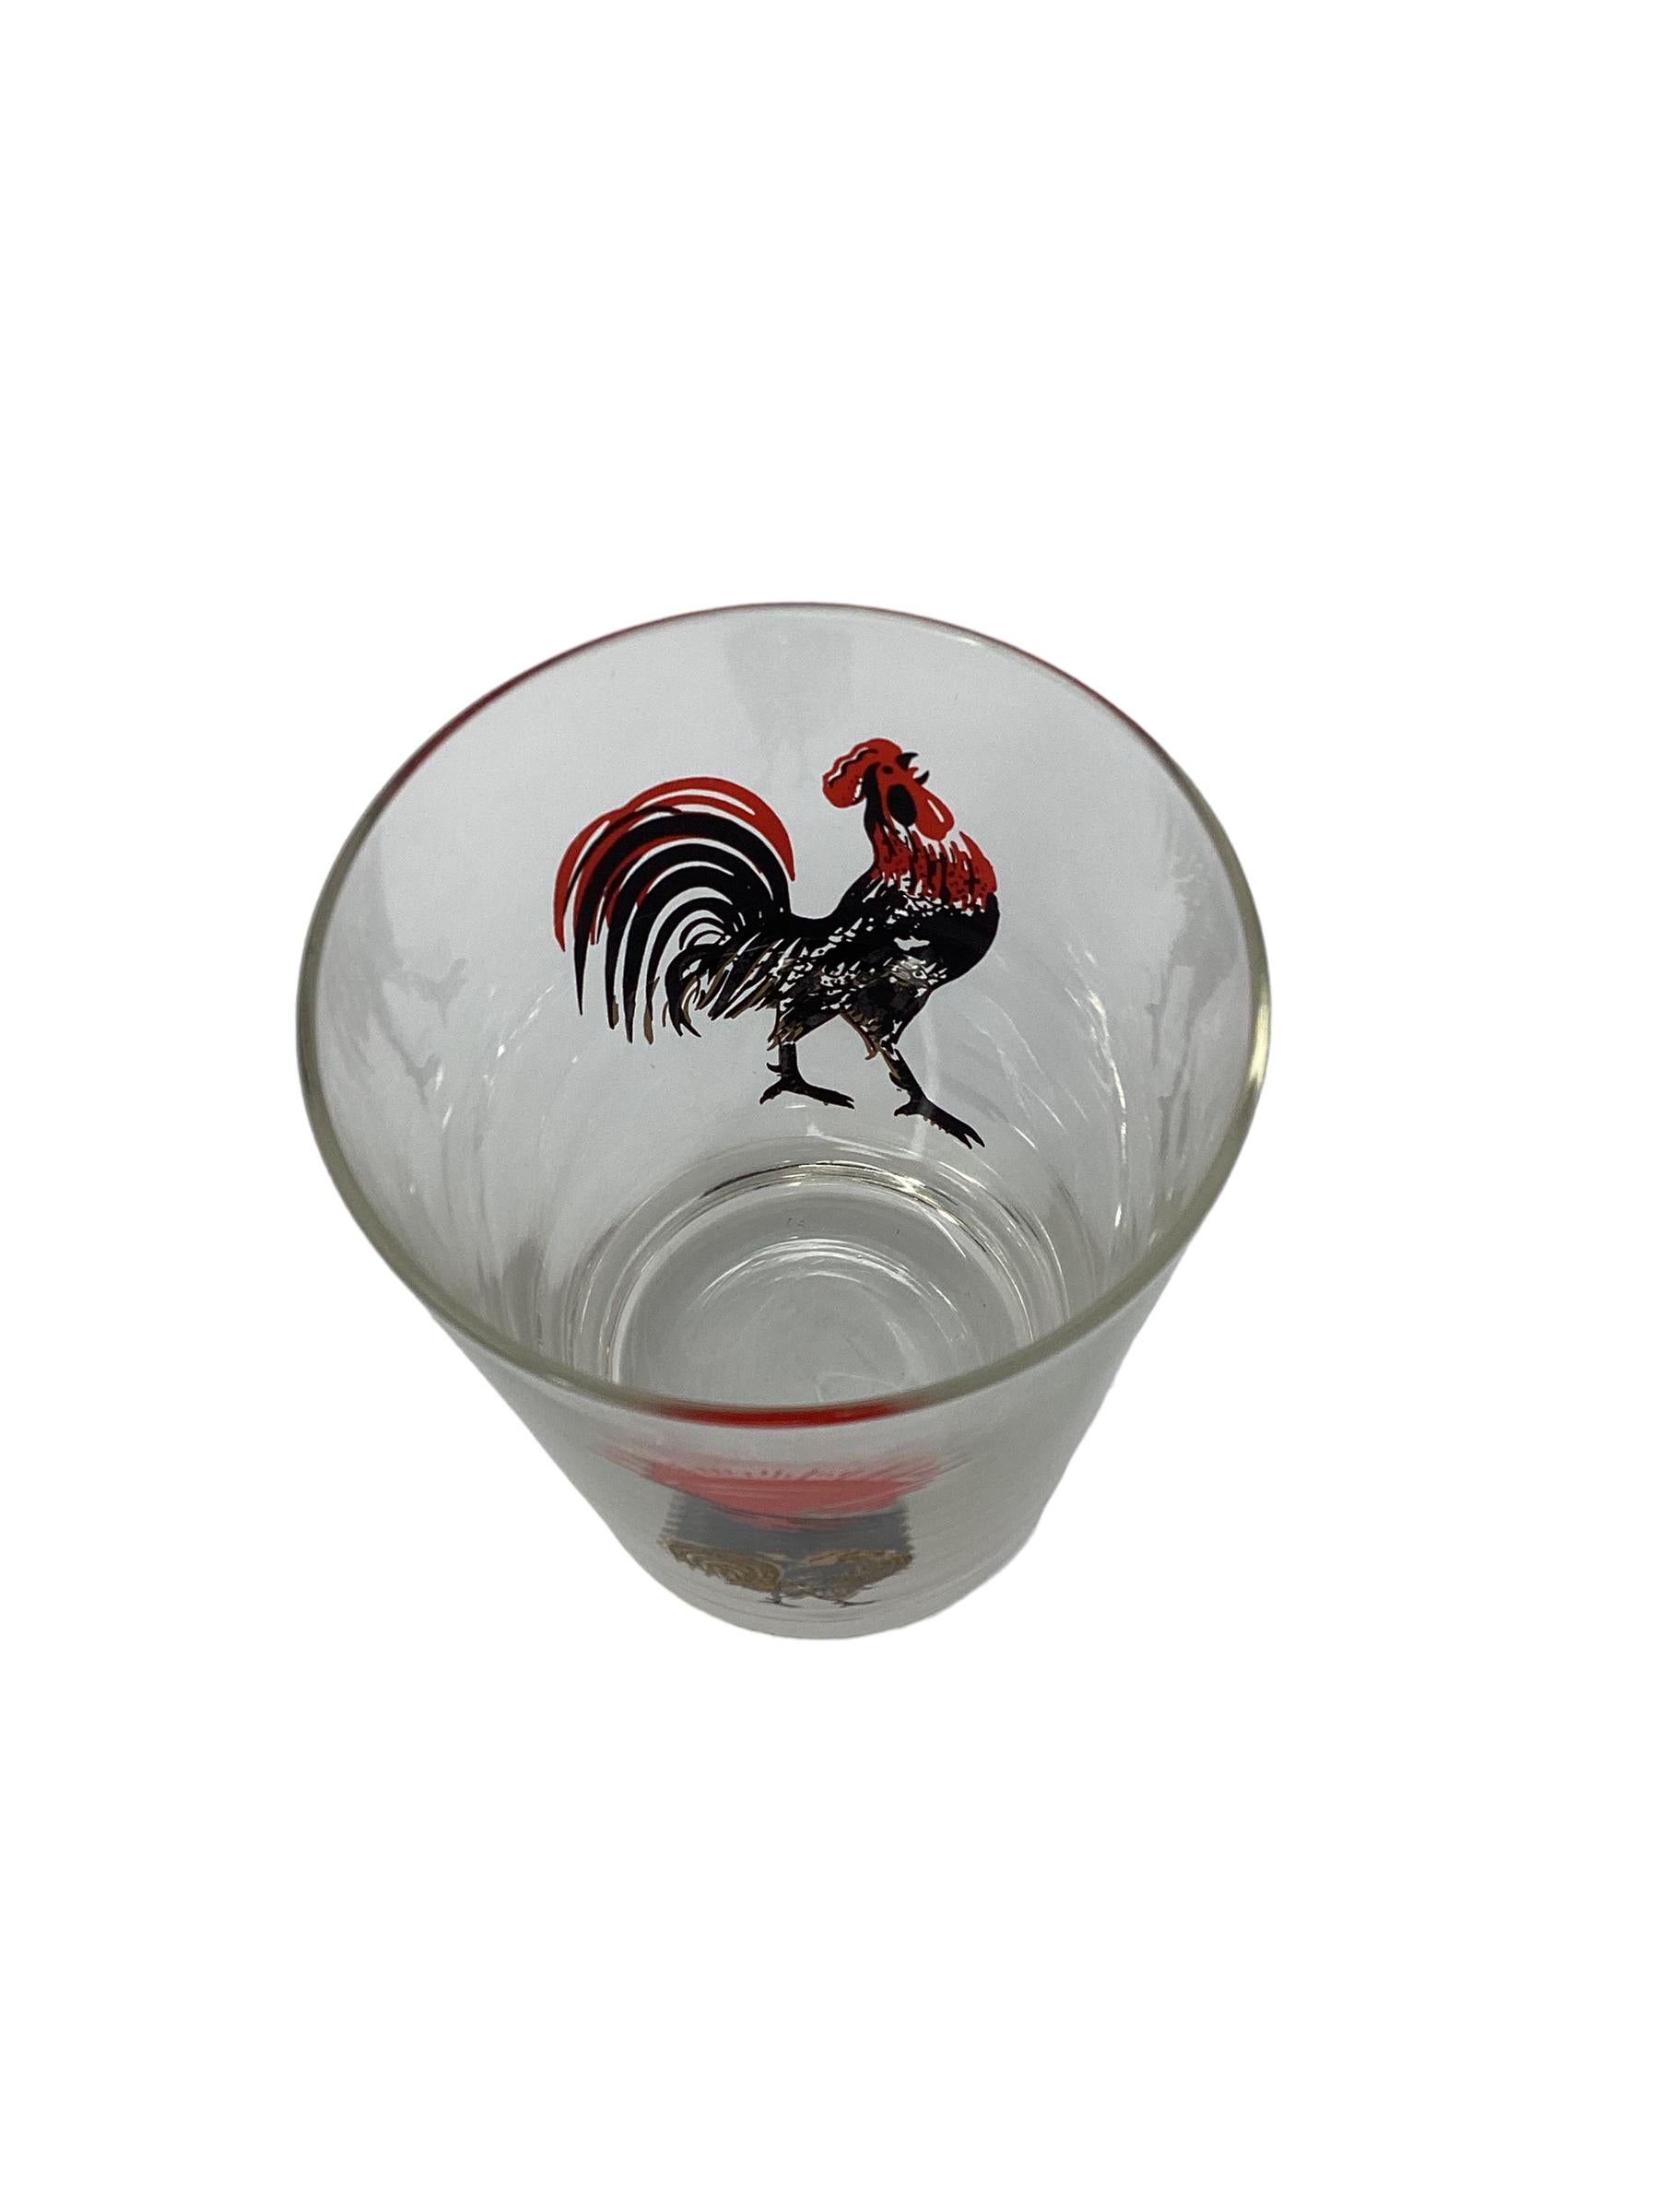  Set of Four Vintage Double Old Fashioned with Large Crowing Roosters. Vibrantly colored Rooster in black and gold, accented in red feathers.